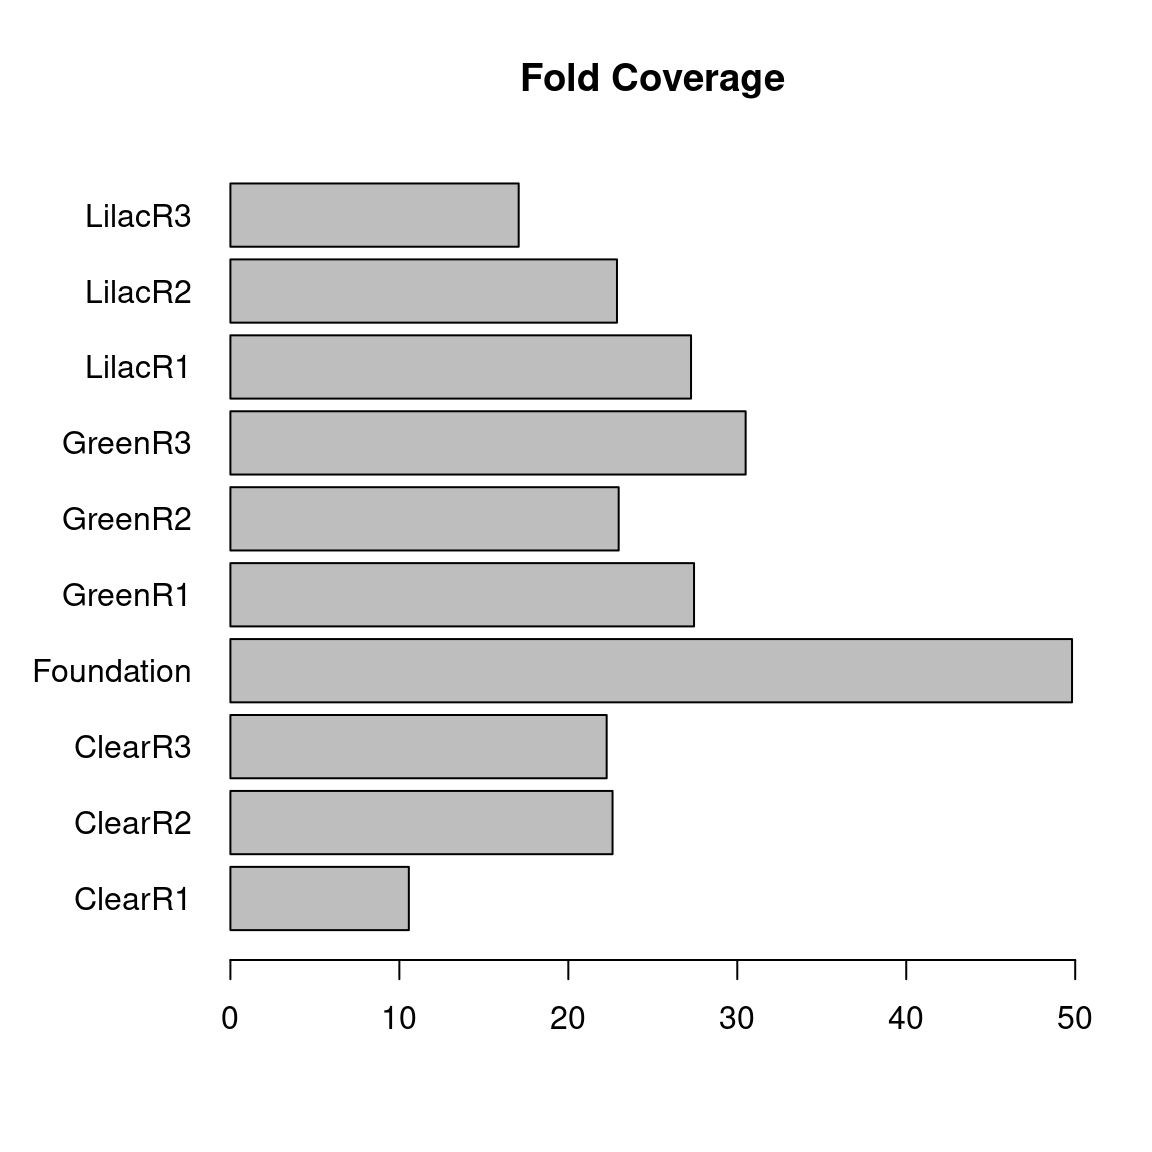 Barchart displaying the fold coverage for each sample. 